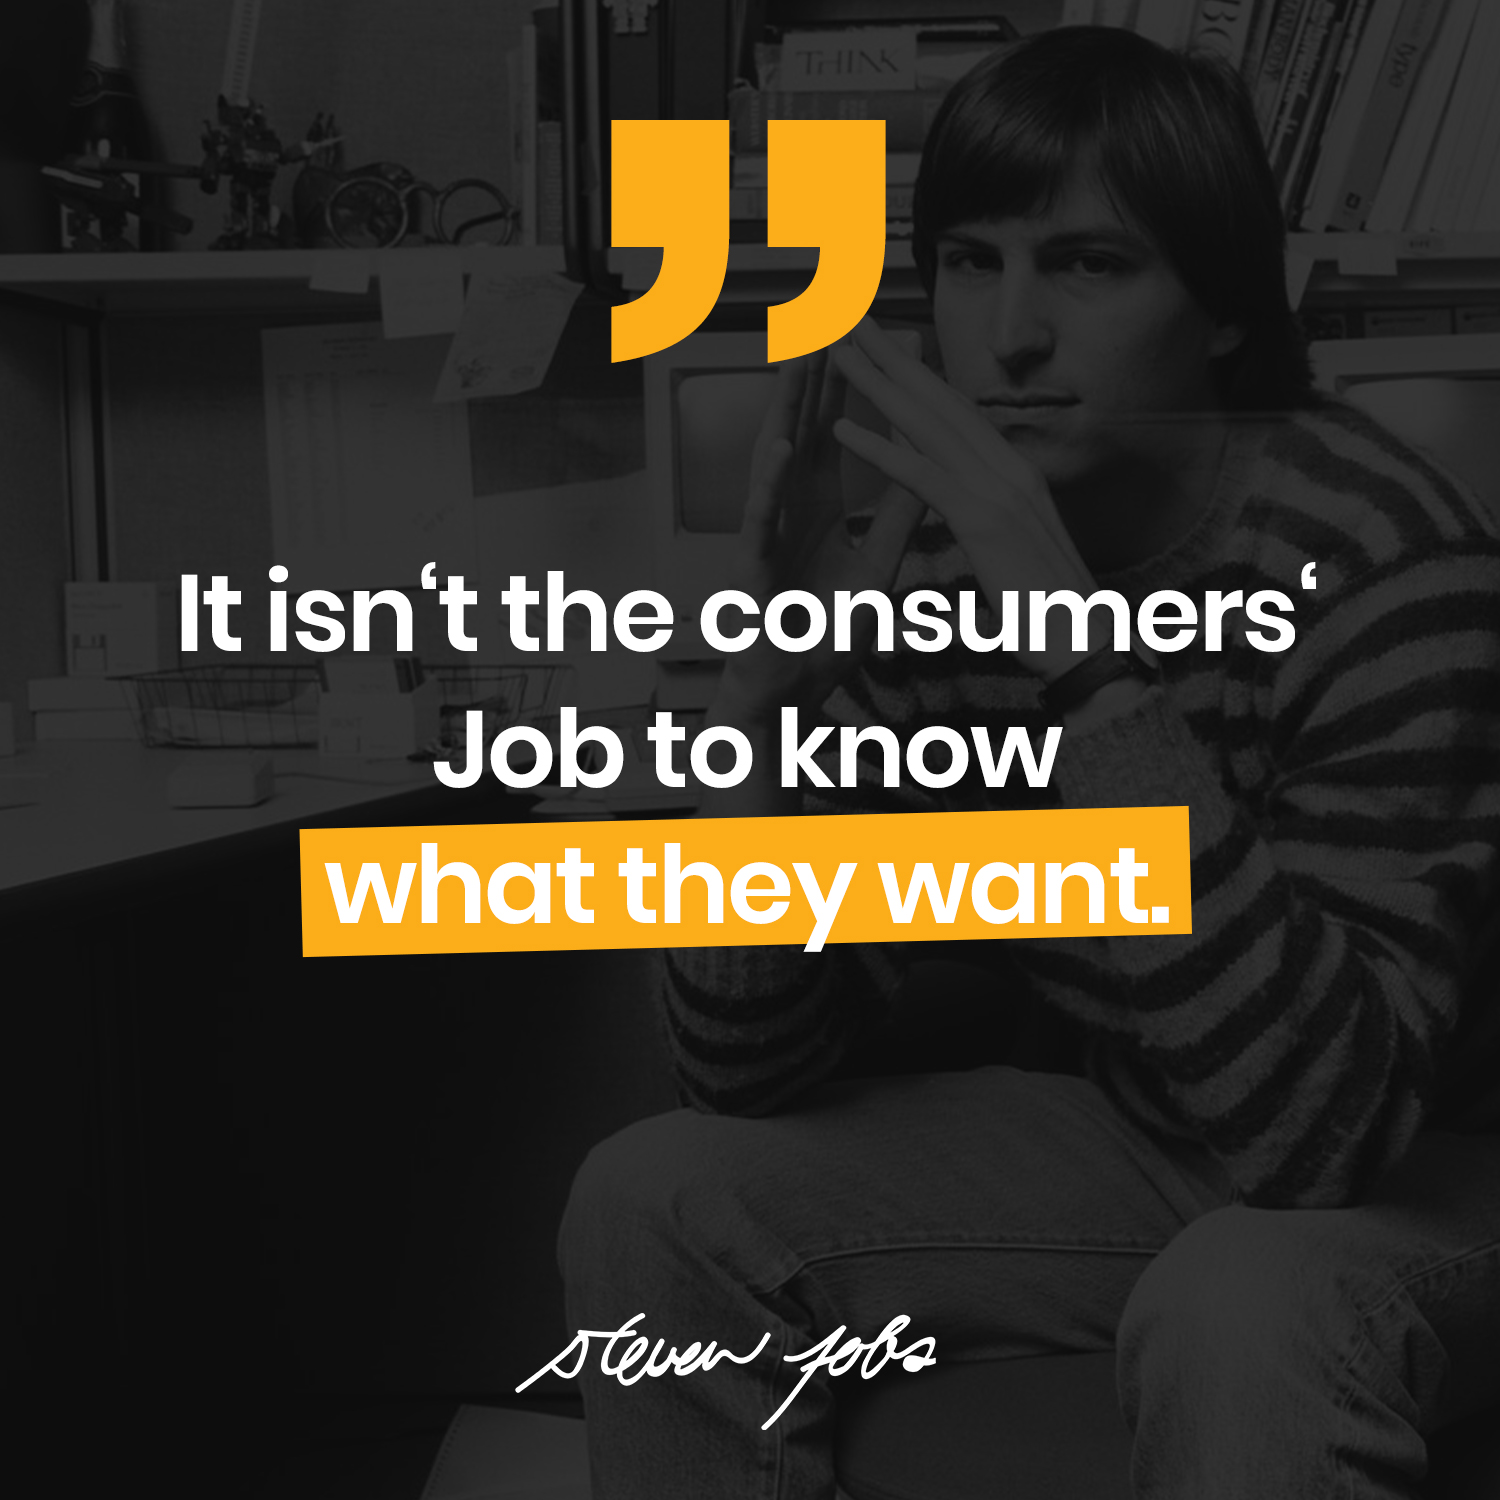 It isn't the consumers' Job to know what they want!